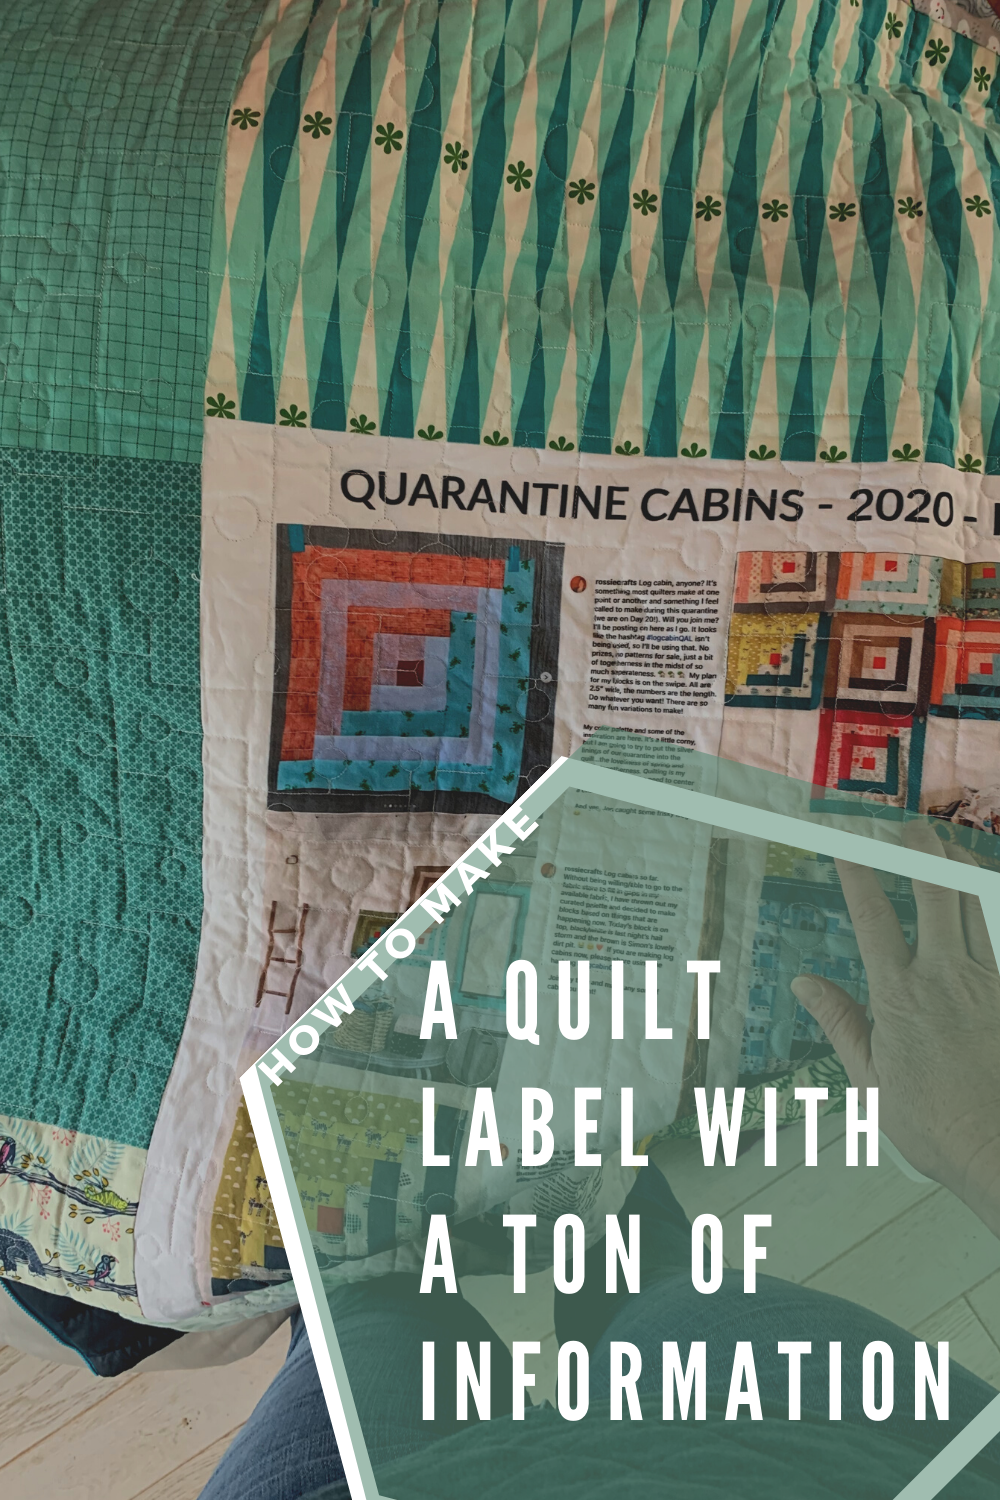 an infographic that says "a quilt label with a ton of information"